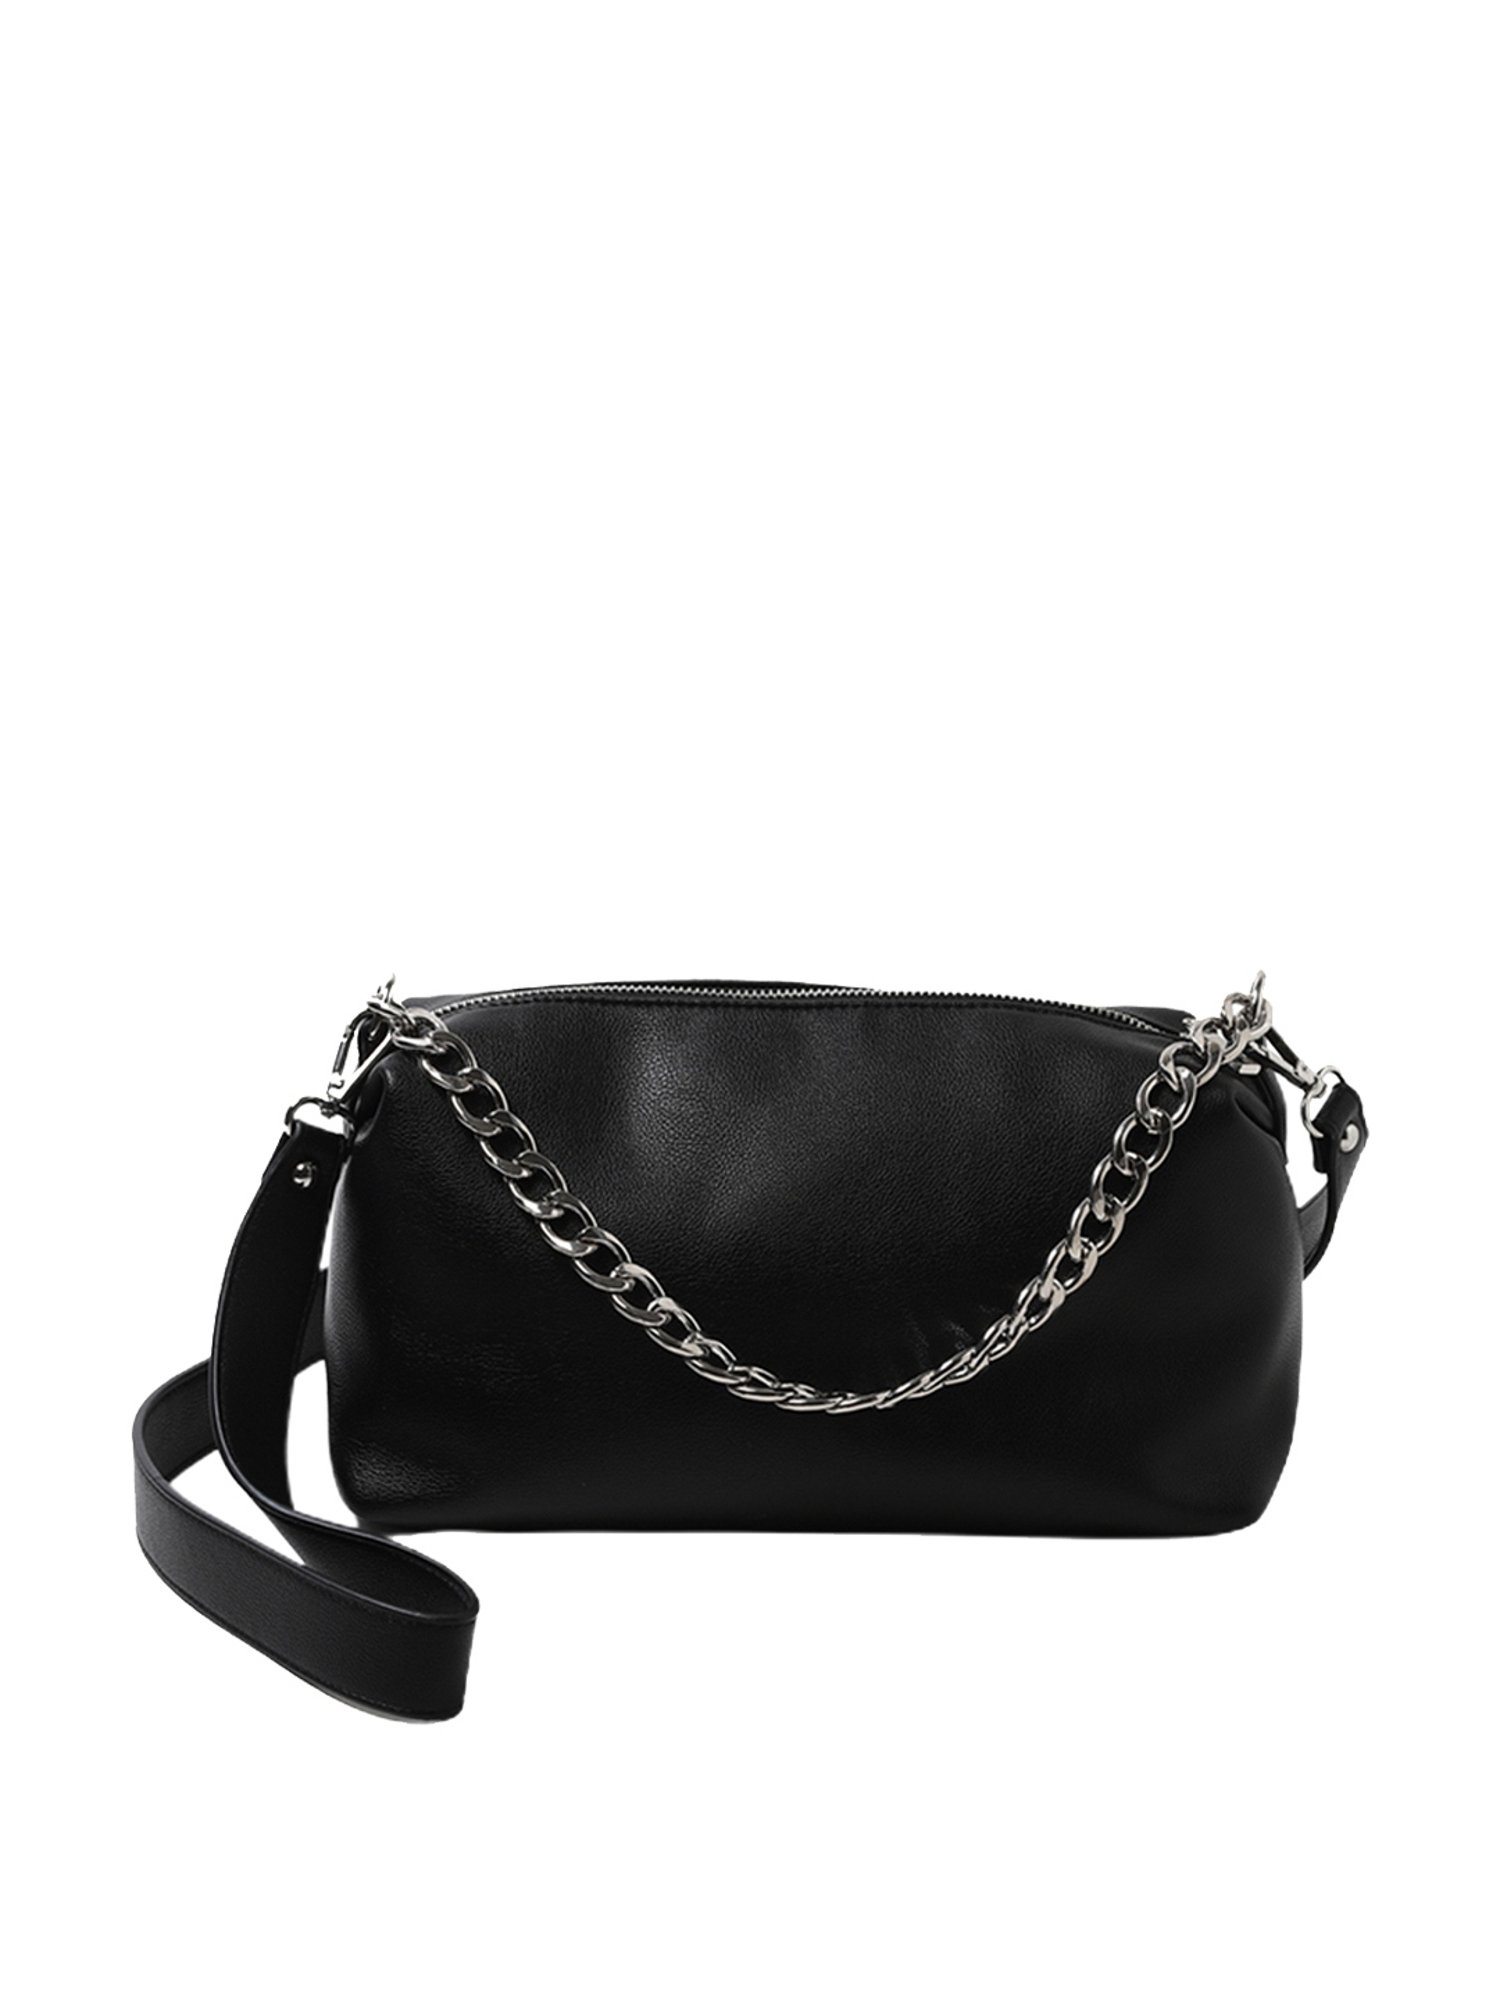 white and black chanel bag